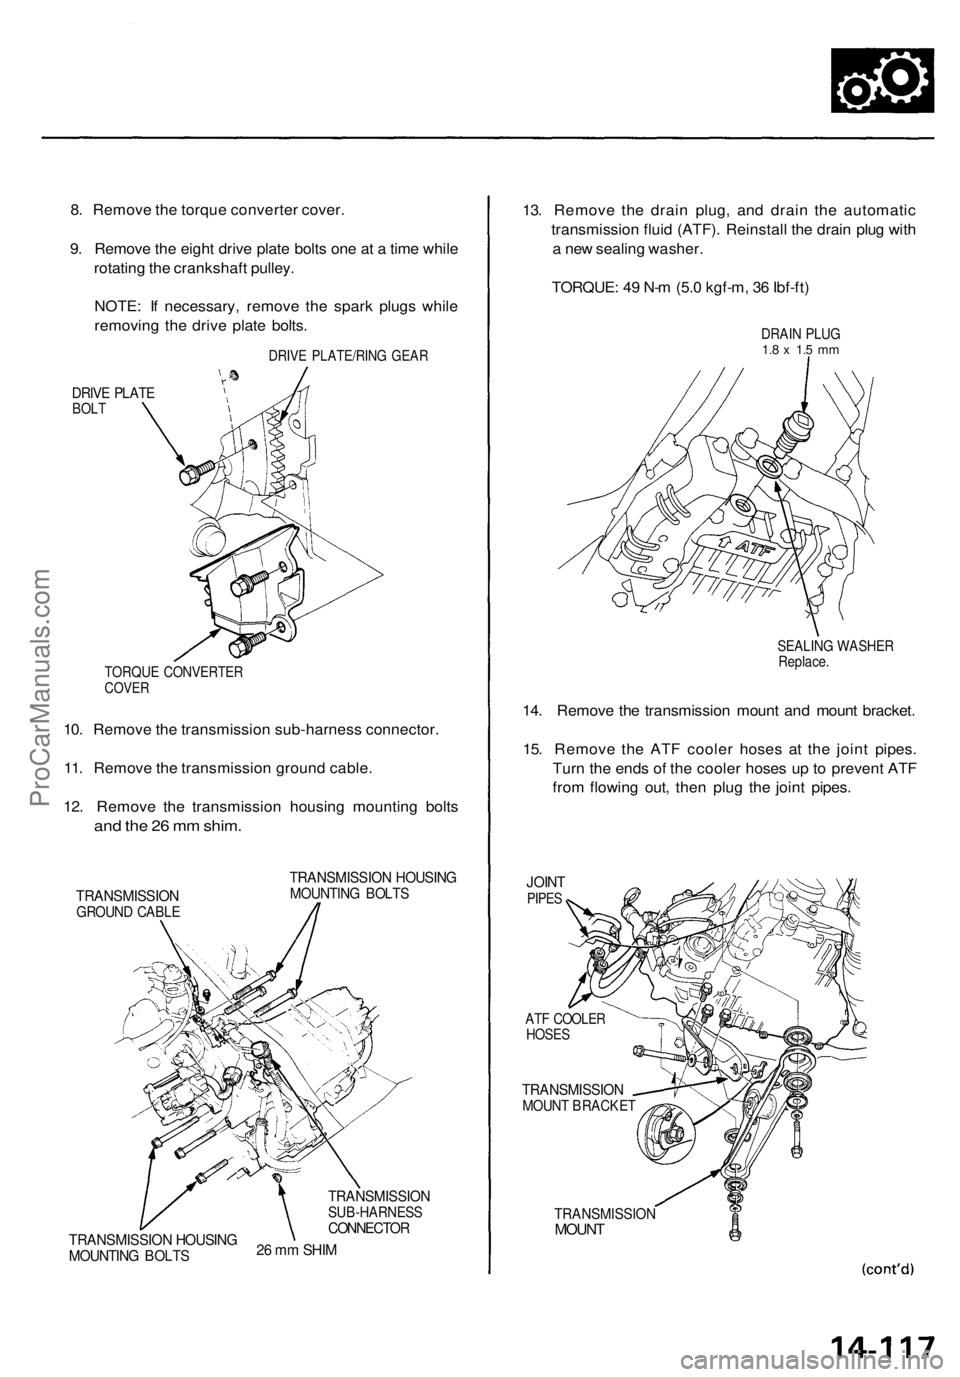 ACURA TL 1995  Service Repair Manual 
8. Remove the torque converter cover.

9. Remove the eight drive plate bolts one at a time while

rotating the crankshaft pulley.

NOTE: If necessary, remove the spark plugs while

removing the drive